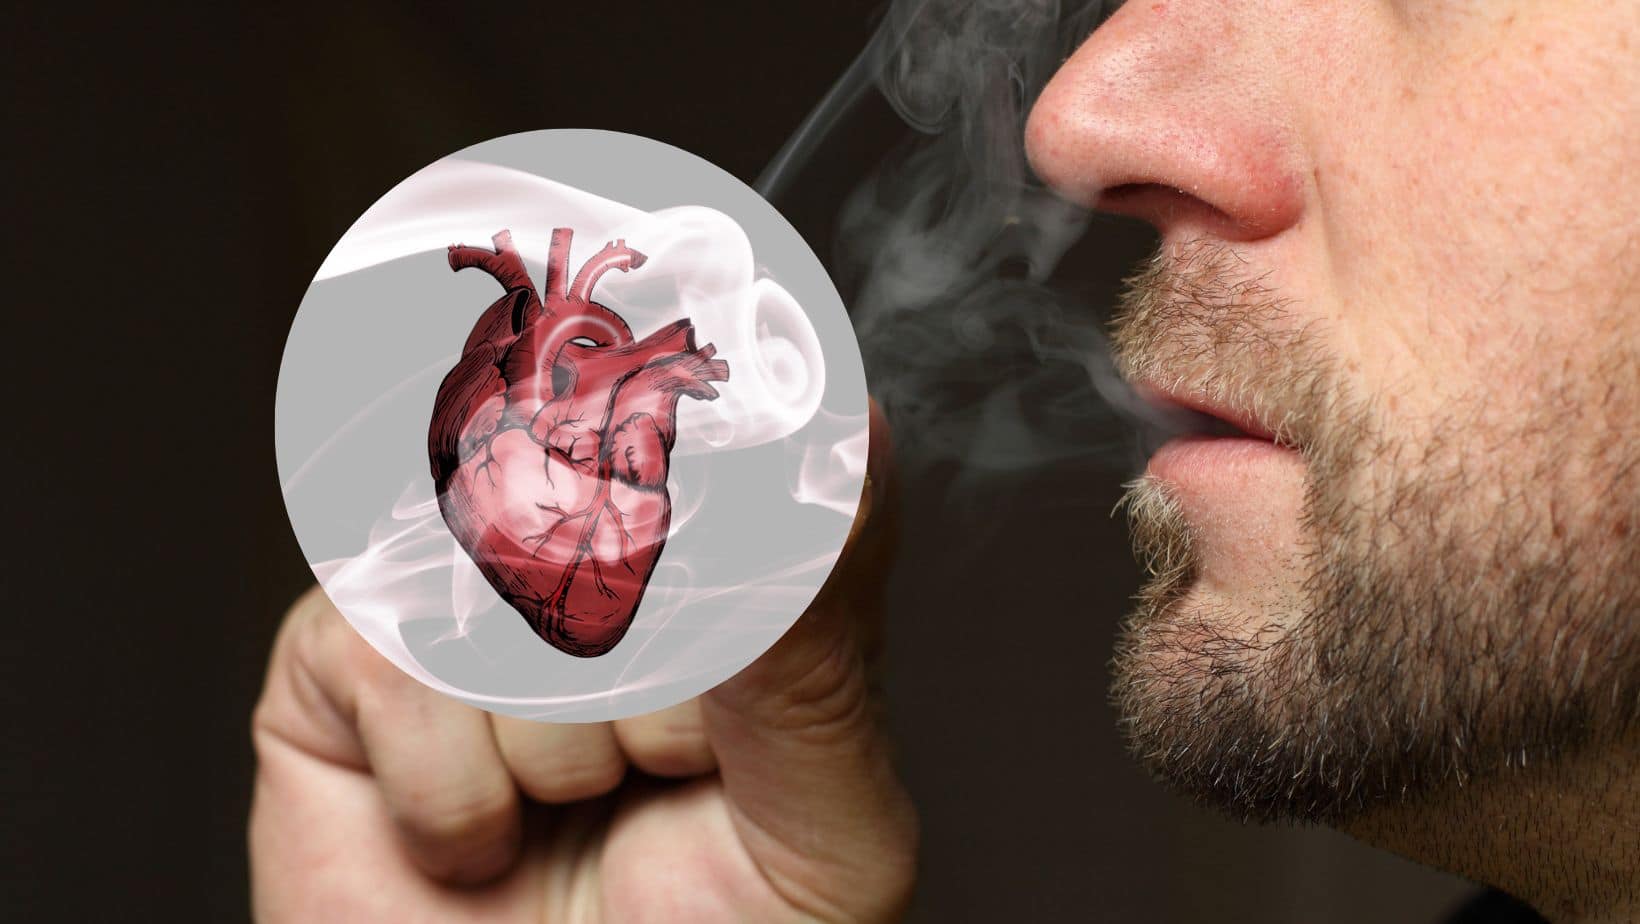 Smoking Weed Daily Can Severely Damage Your Heart, Cause Blood Clotting: Warns Experts